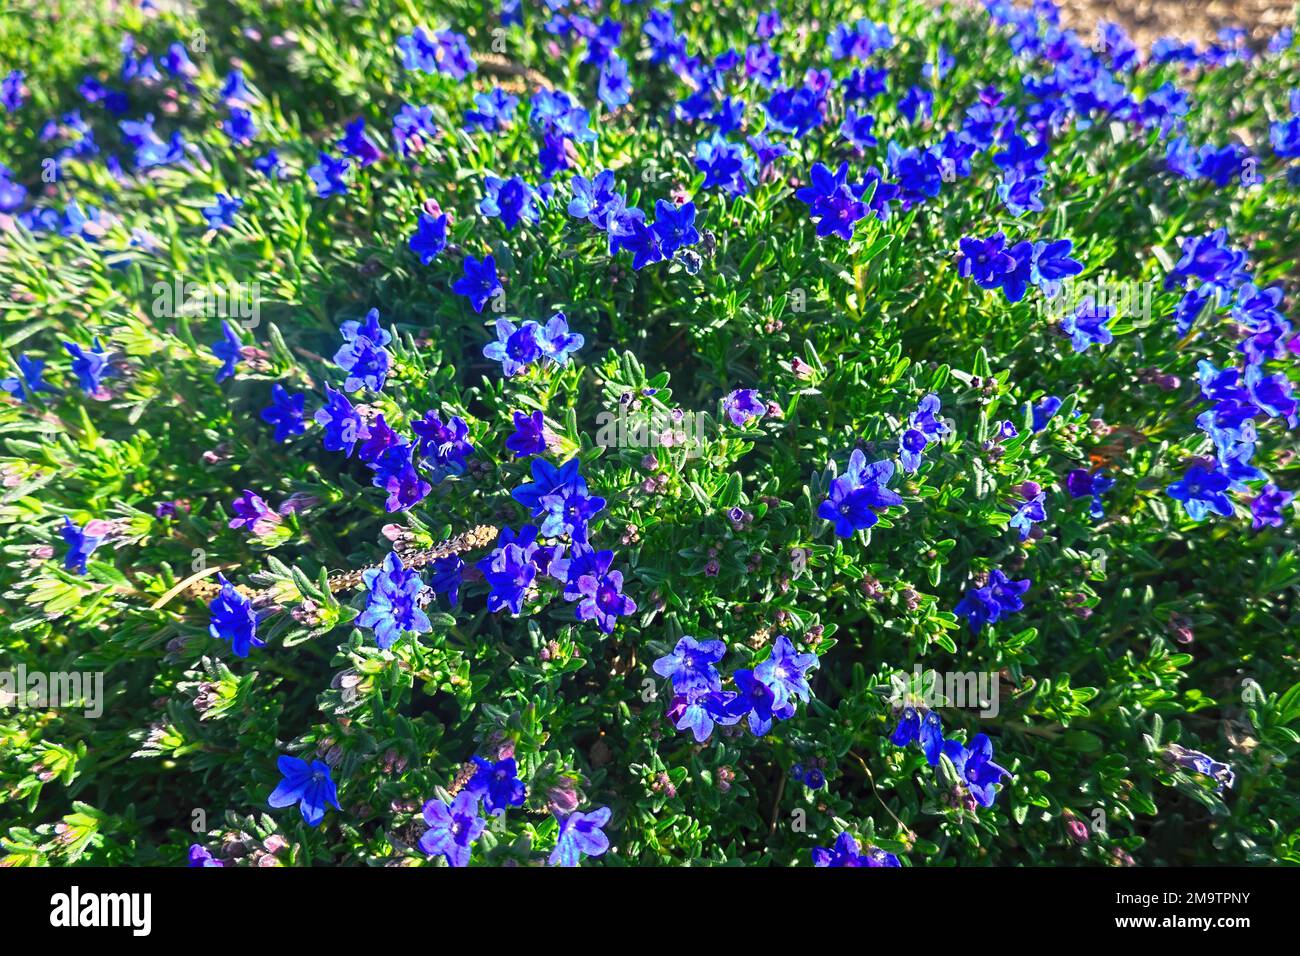 Lithodora (Lithodora diffusa) - multi-branched ground cover with funnel-shaped blue flowers. B. C., Canada. Stock Photo